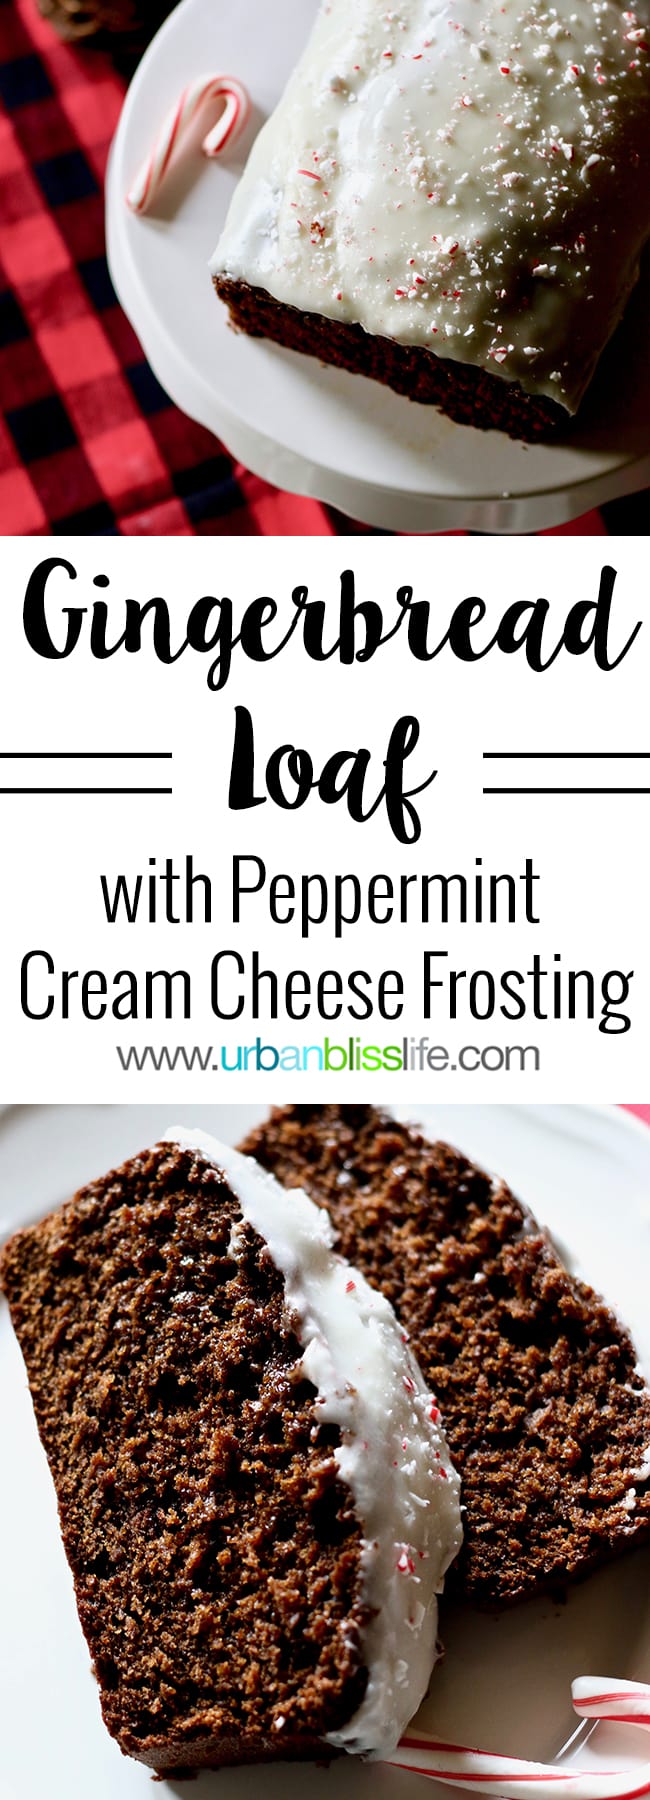 Gingerbread Loaf with Peppermint Cream Cheese Frosting, recipe on UrbanBlissLife.com